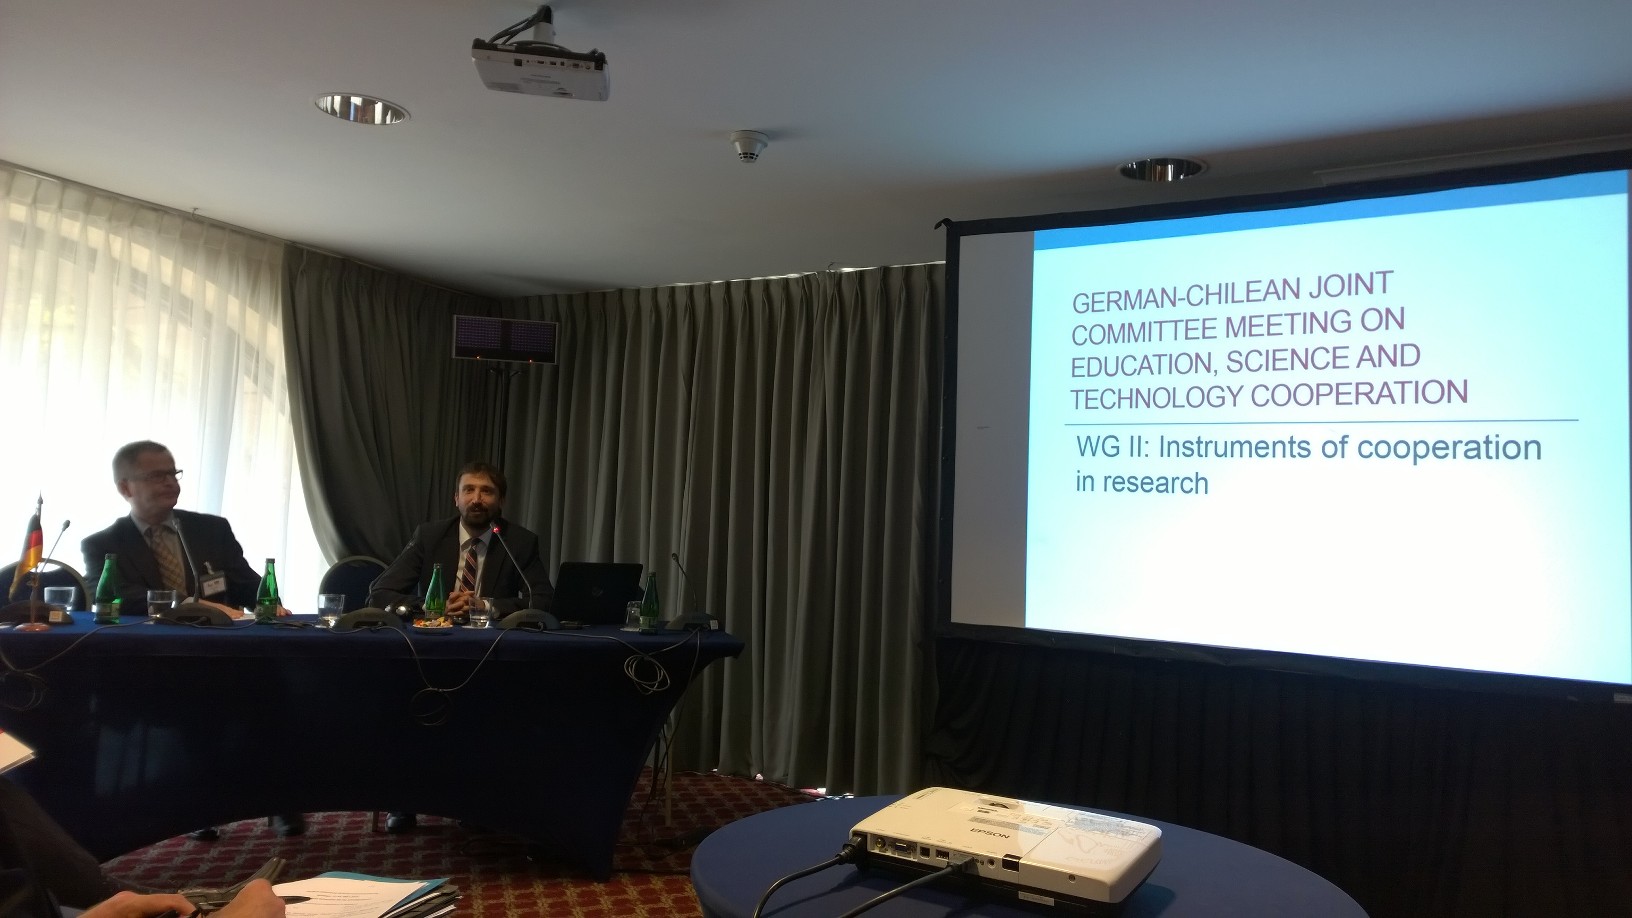 Dietrich Halm (DFG, left) and Gonzalo Arenas (CONICYT, right) present results from the working group on research cooperation.